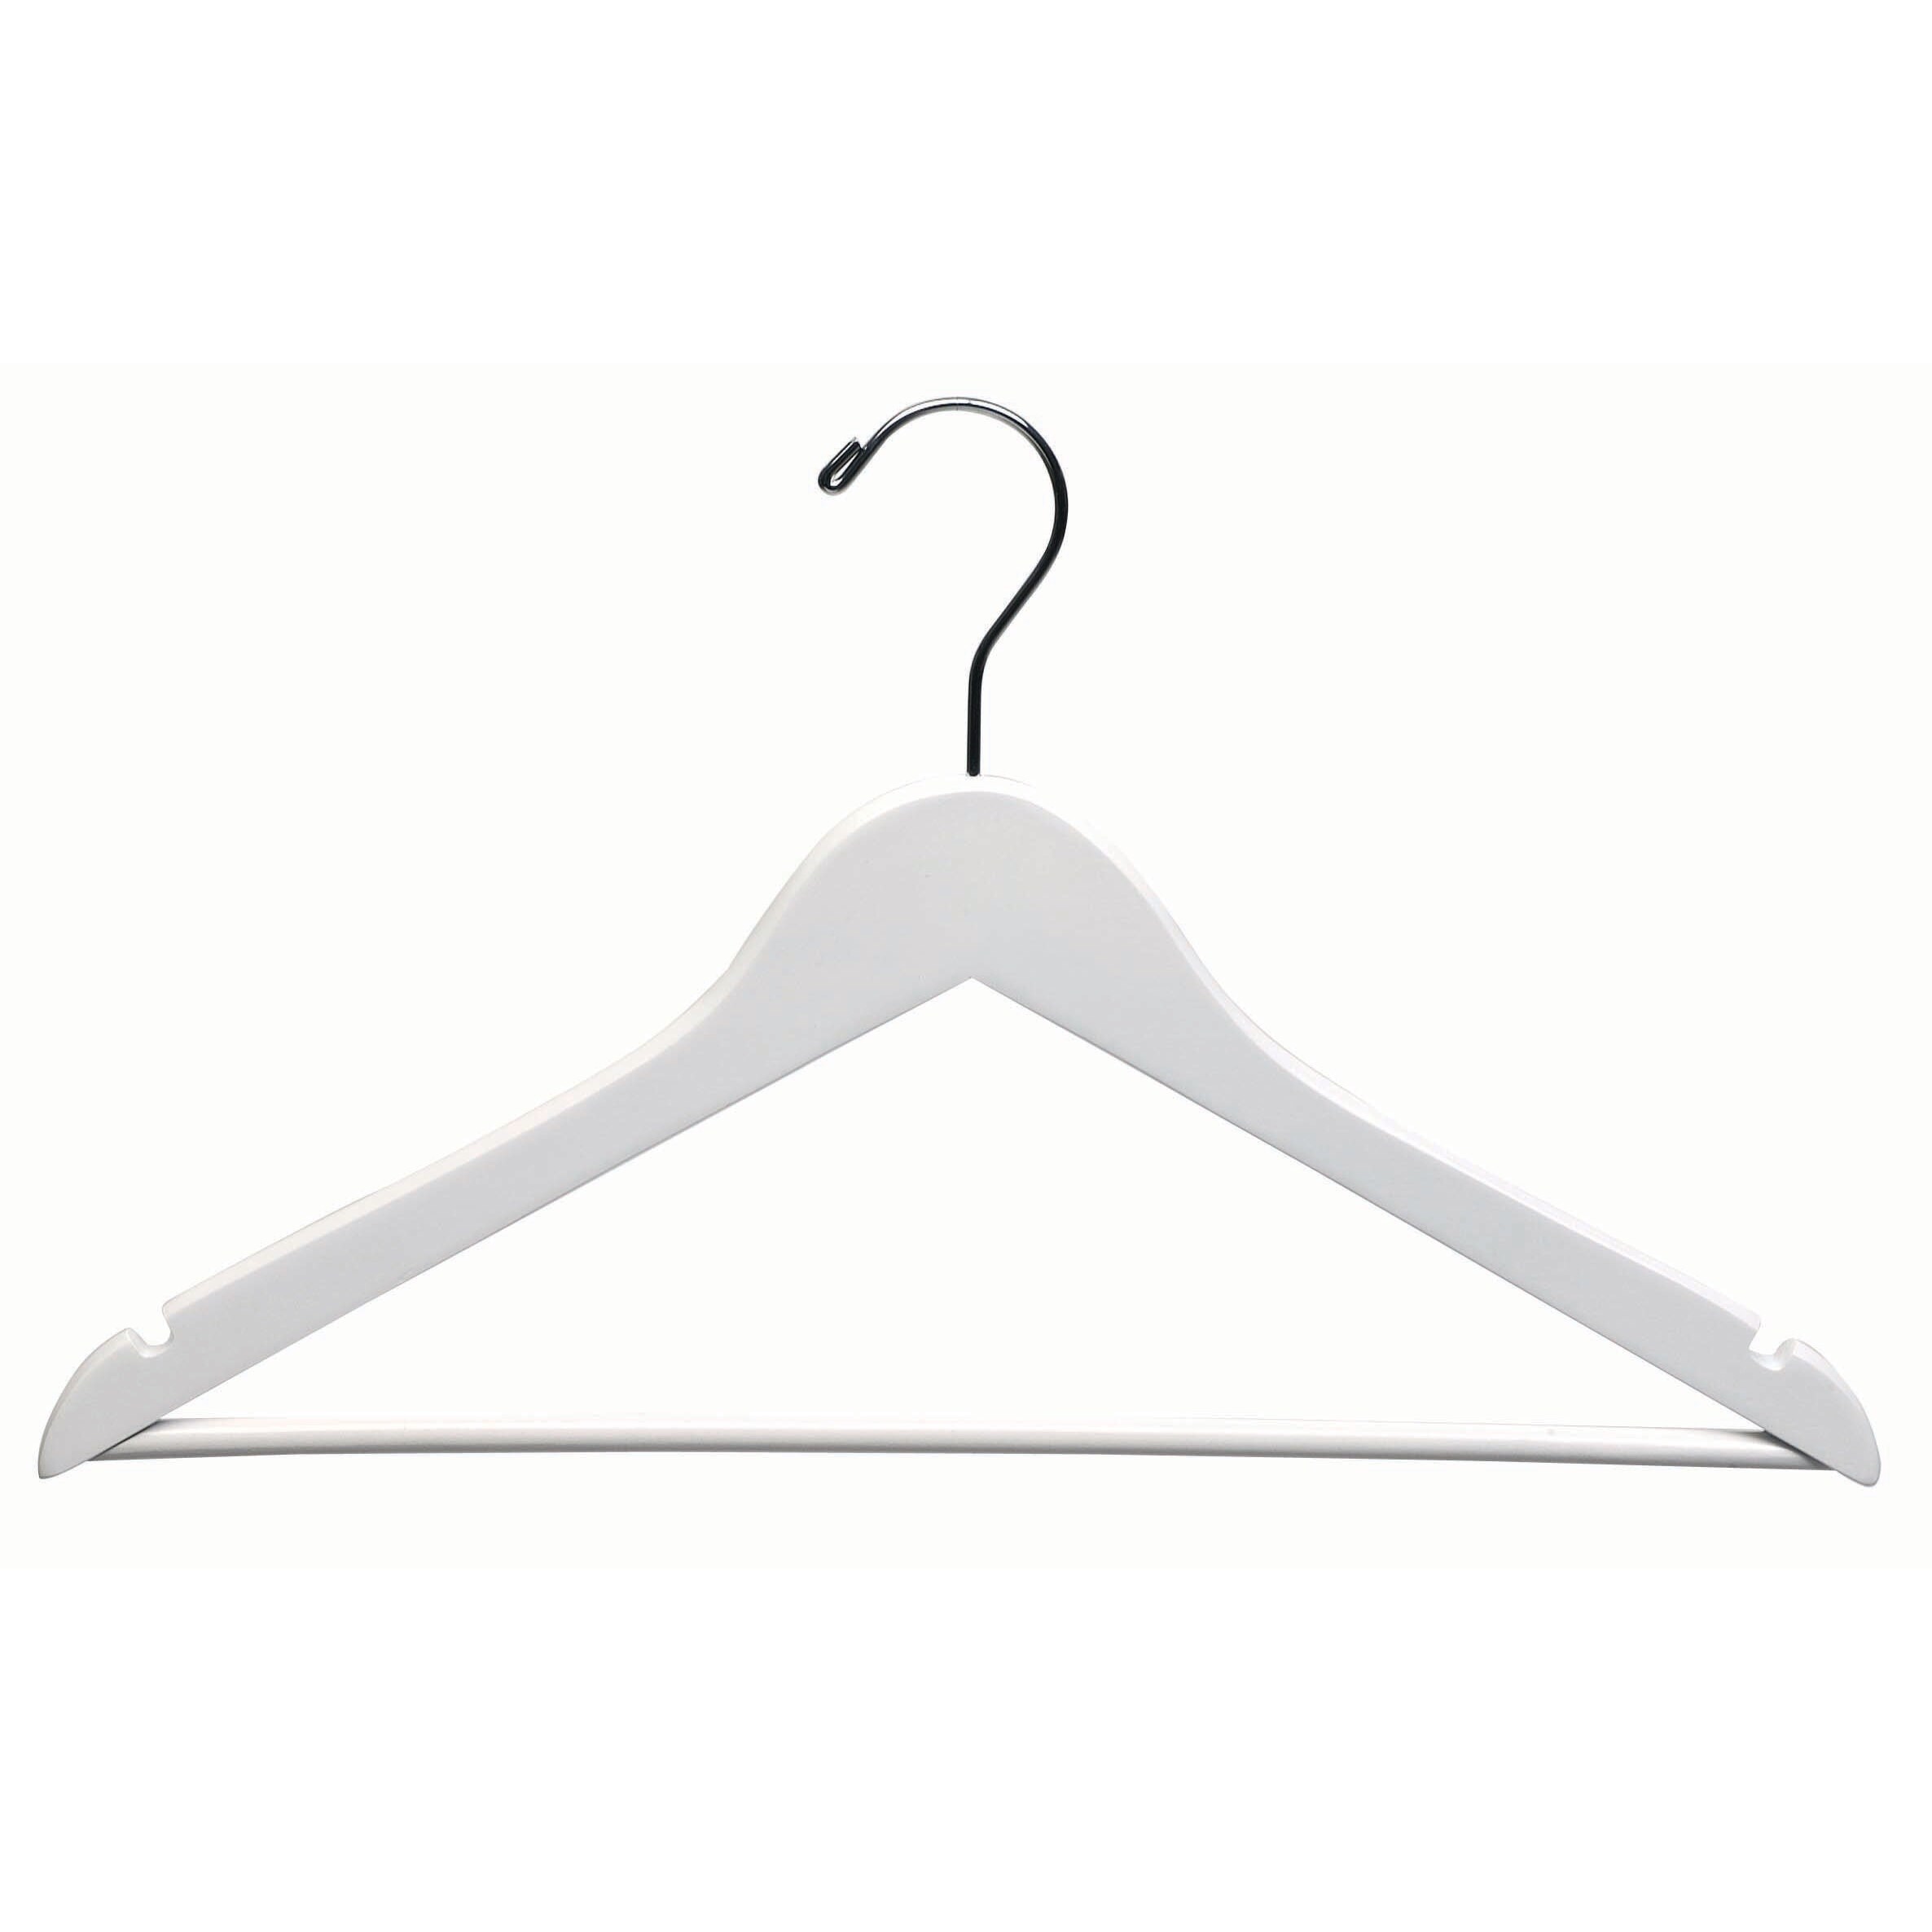 https://ak1.ostkcdn.com/images/products/10163160/White-Wooden-Suit-Hangers-with-Bar-Box-of-100-1502ae00-dbcd-4102-89f6-275303923ff7.jpg